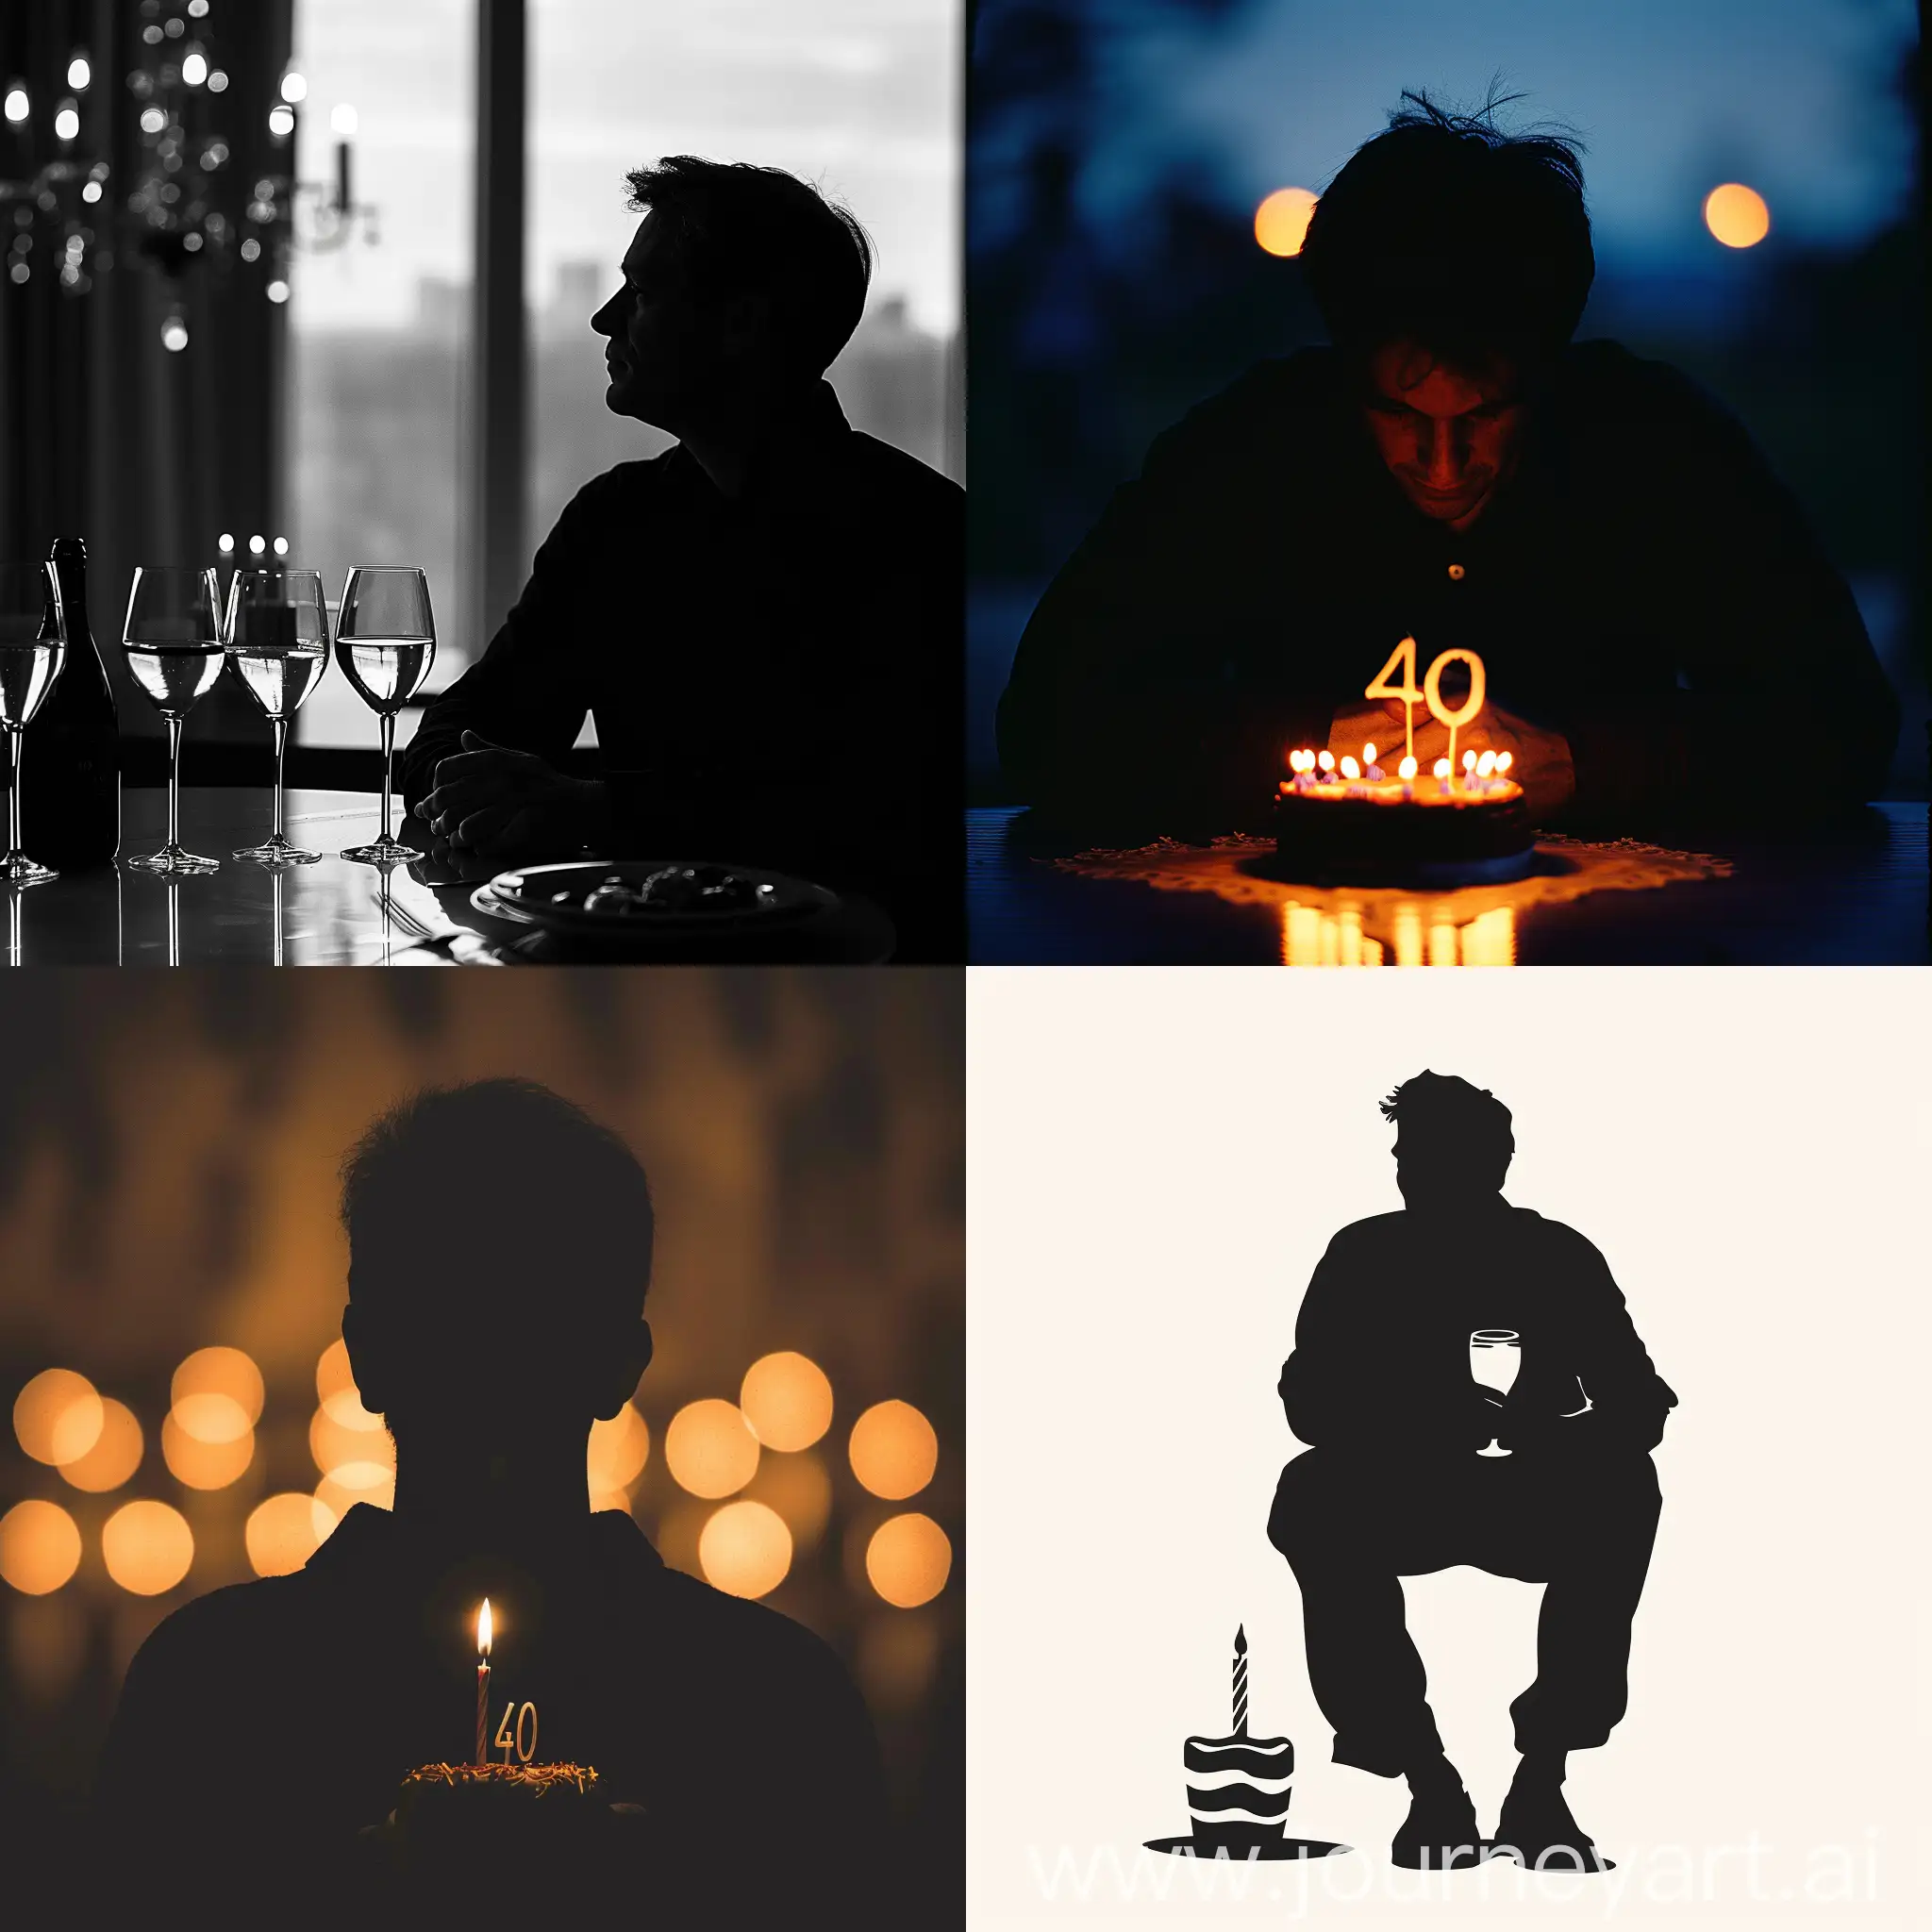 Solitary-Birthday-Celebration-Silhouette-of-a-MiddleAged-Man